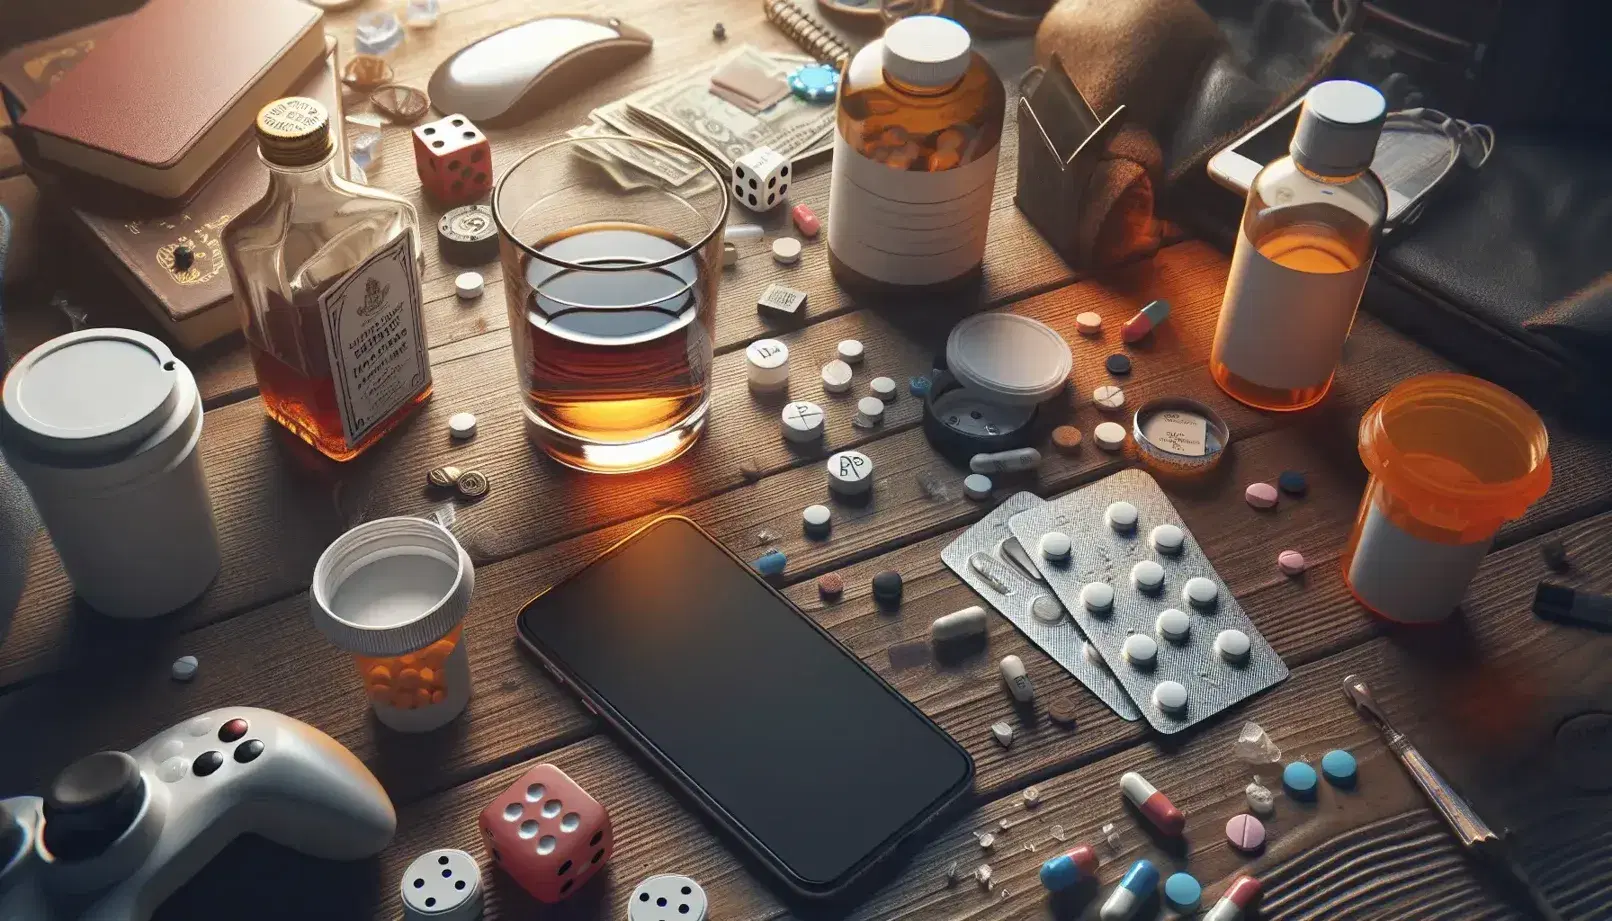 Messy wooden table with glass of brown liquid, open pill bottle, turned on smartphone, dice and deck of cards.